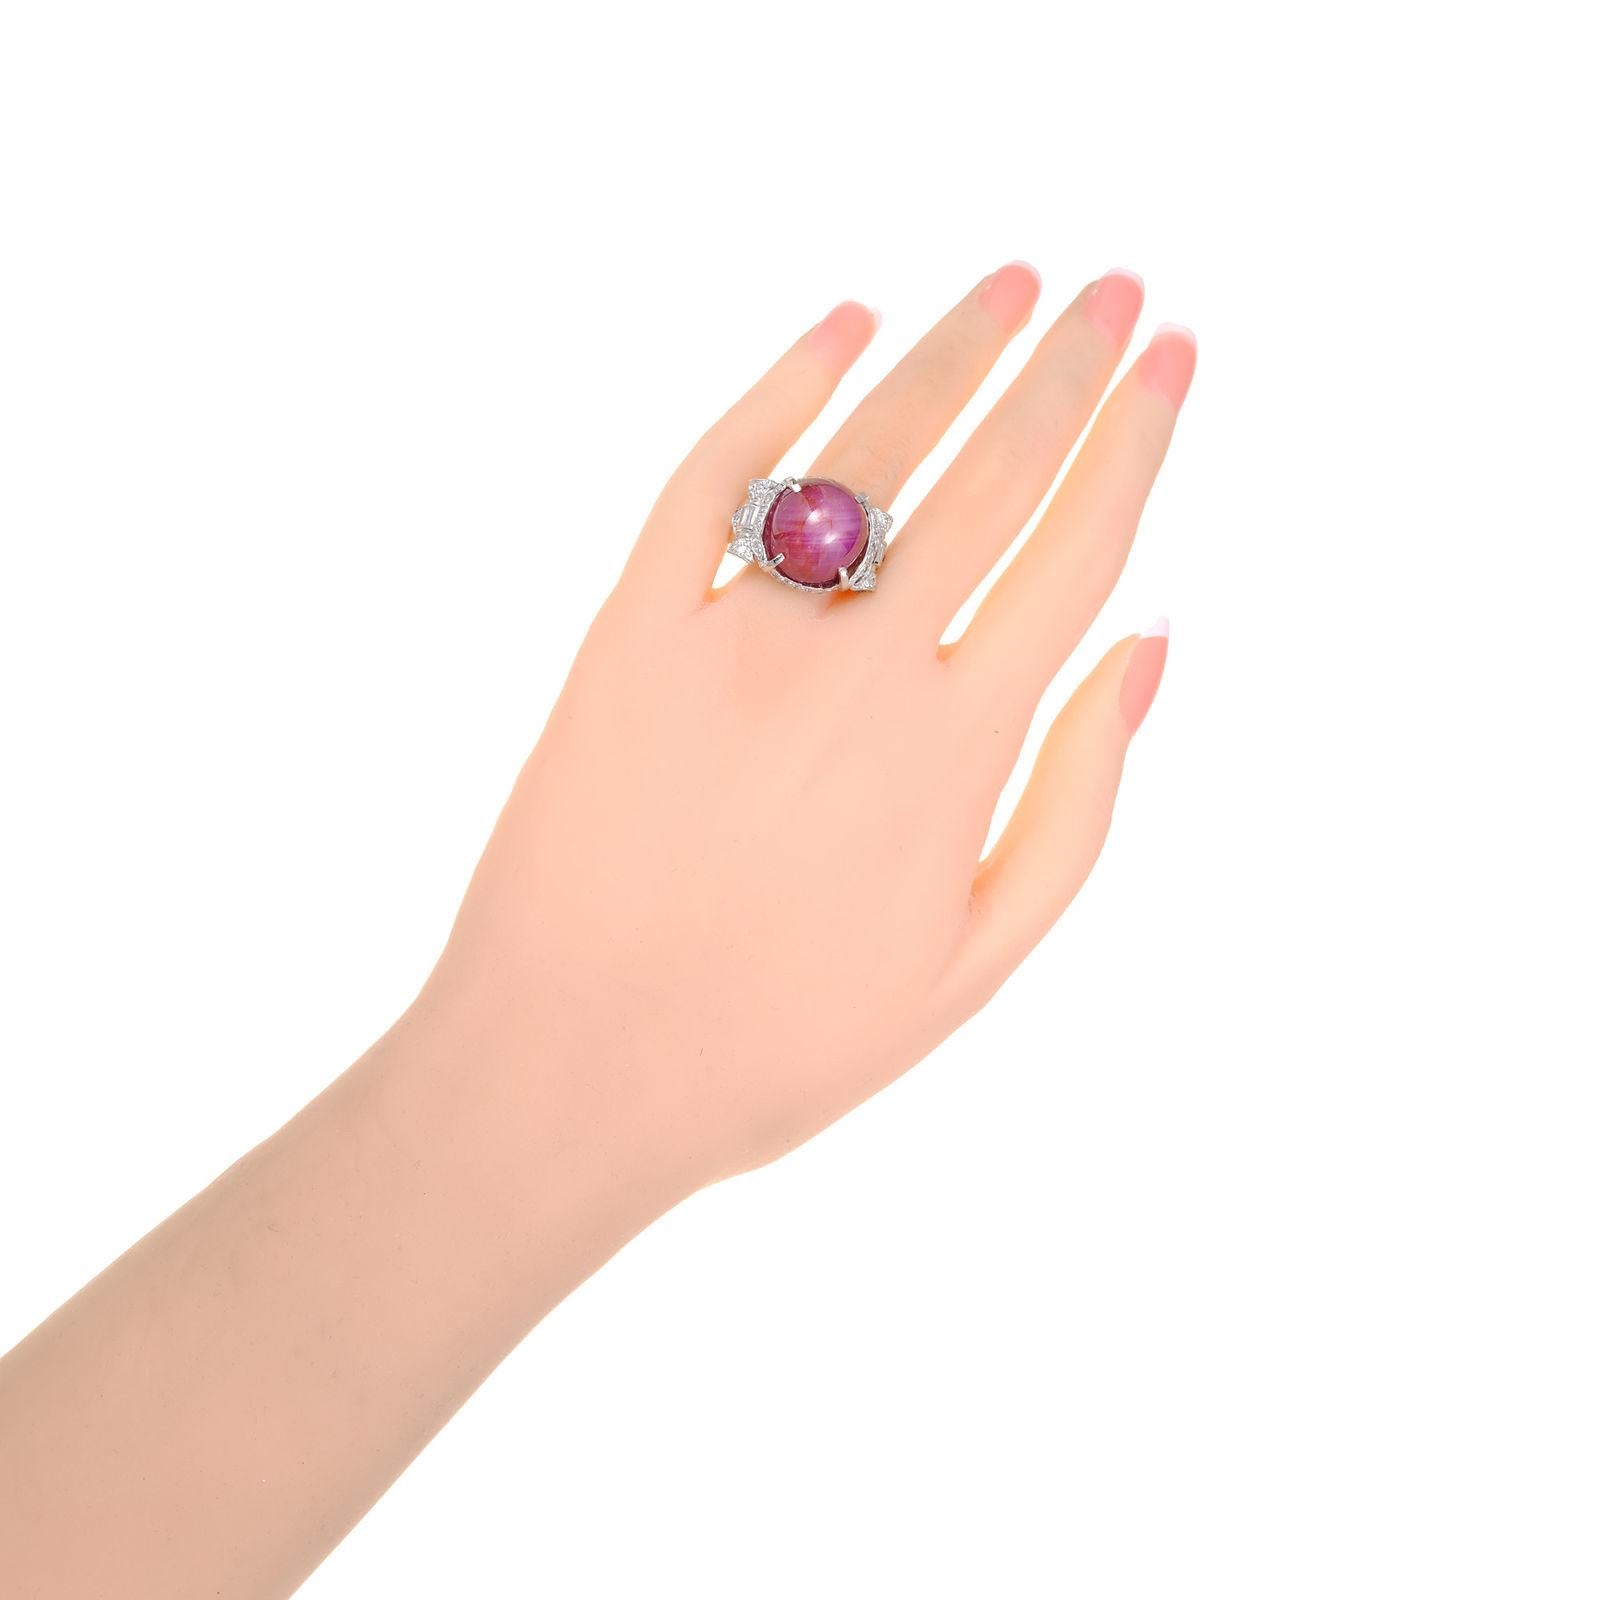 GIA Certified 24.88 Carat Star Ruby Diamond White Gold Art Deco Cocktail Ring For Sale 1